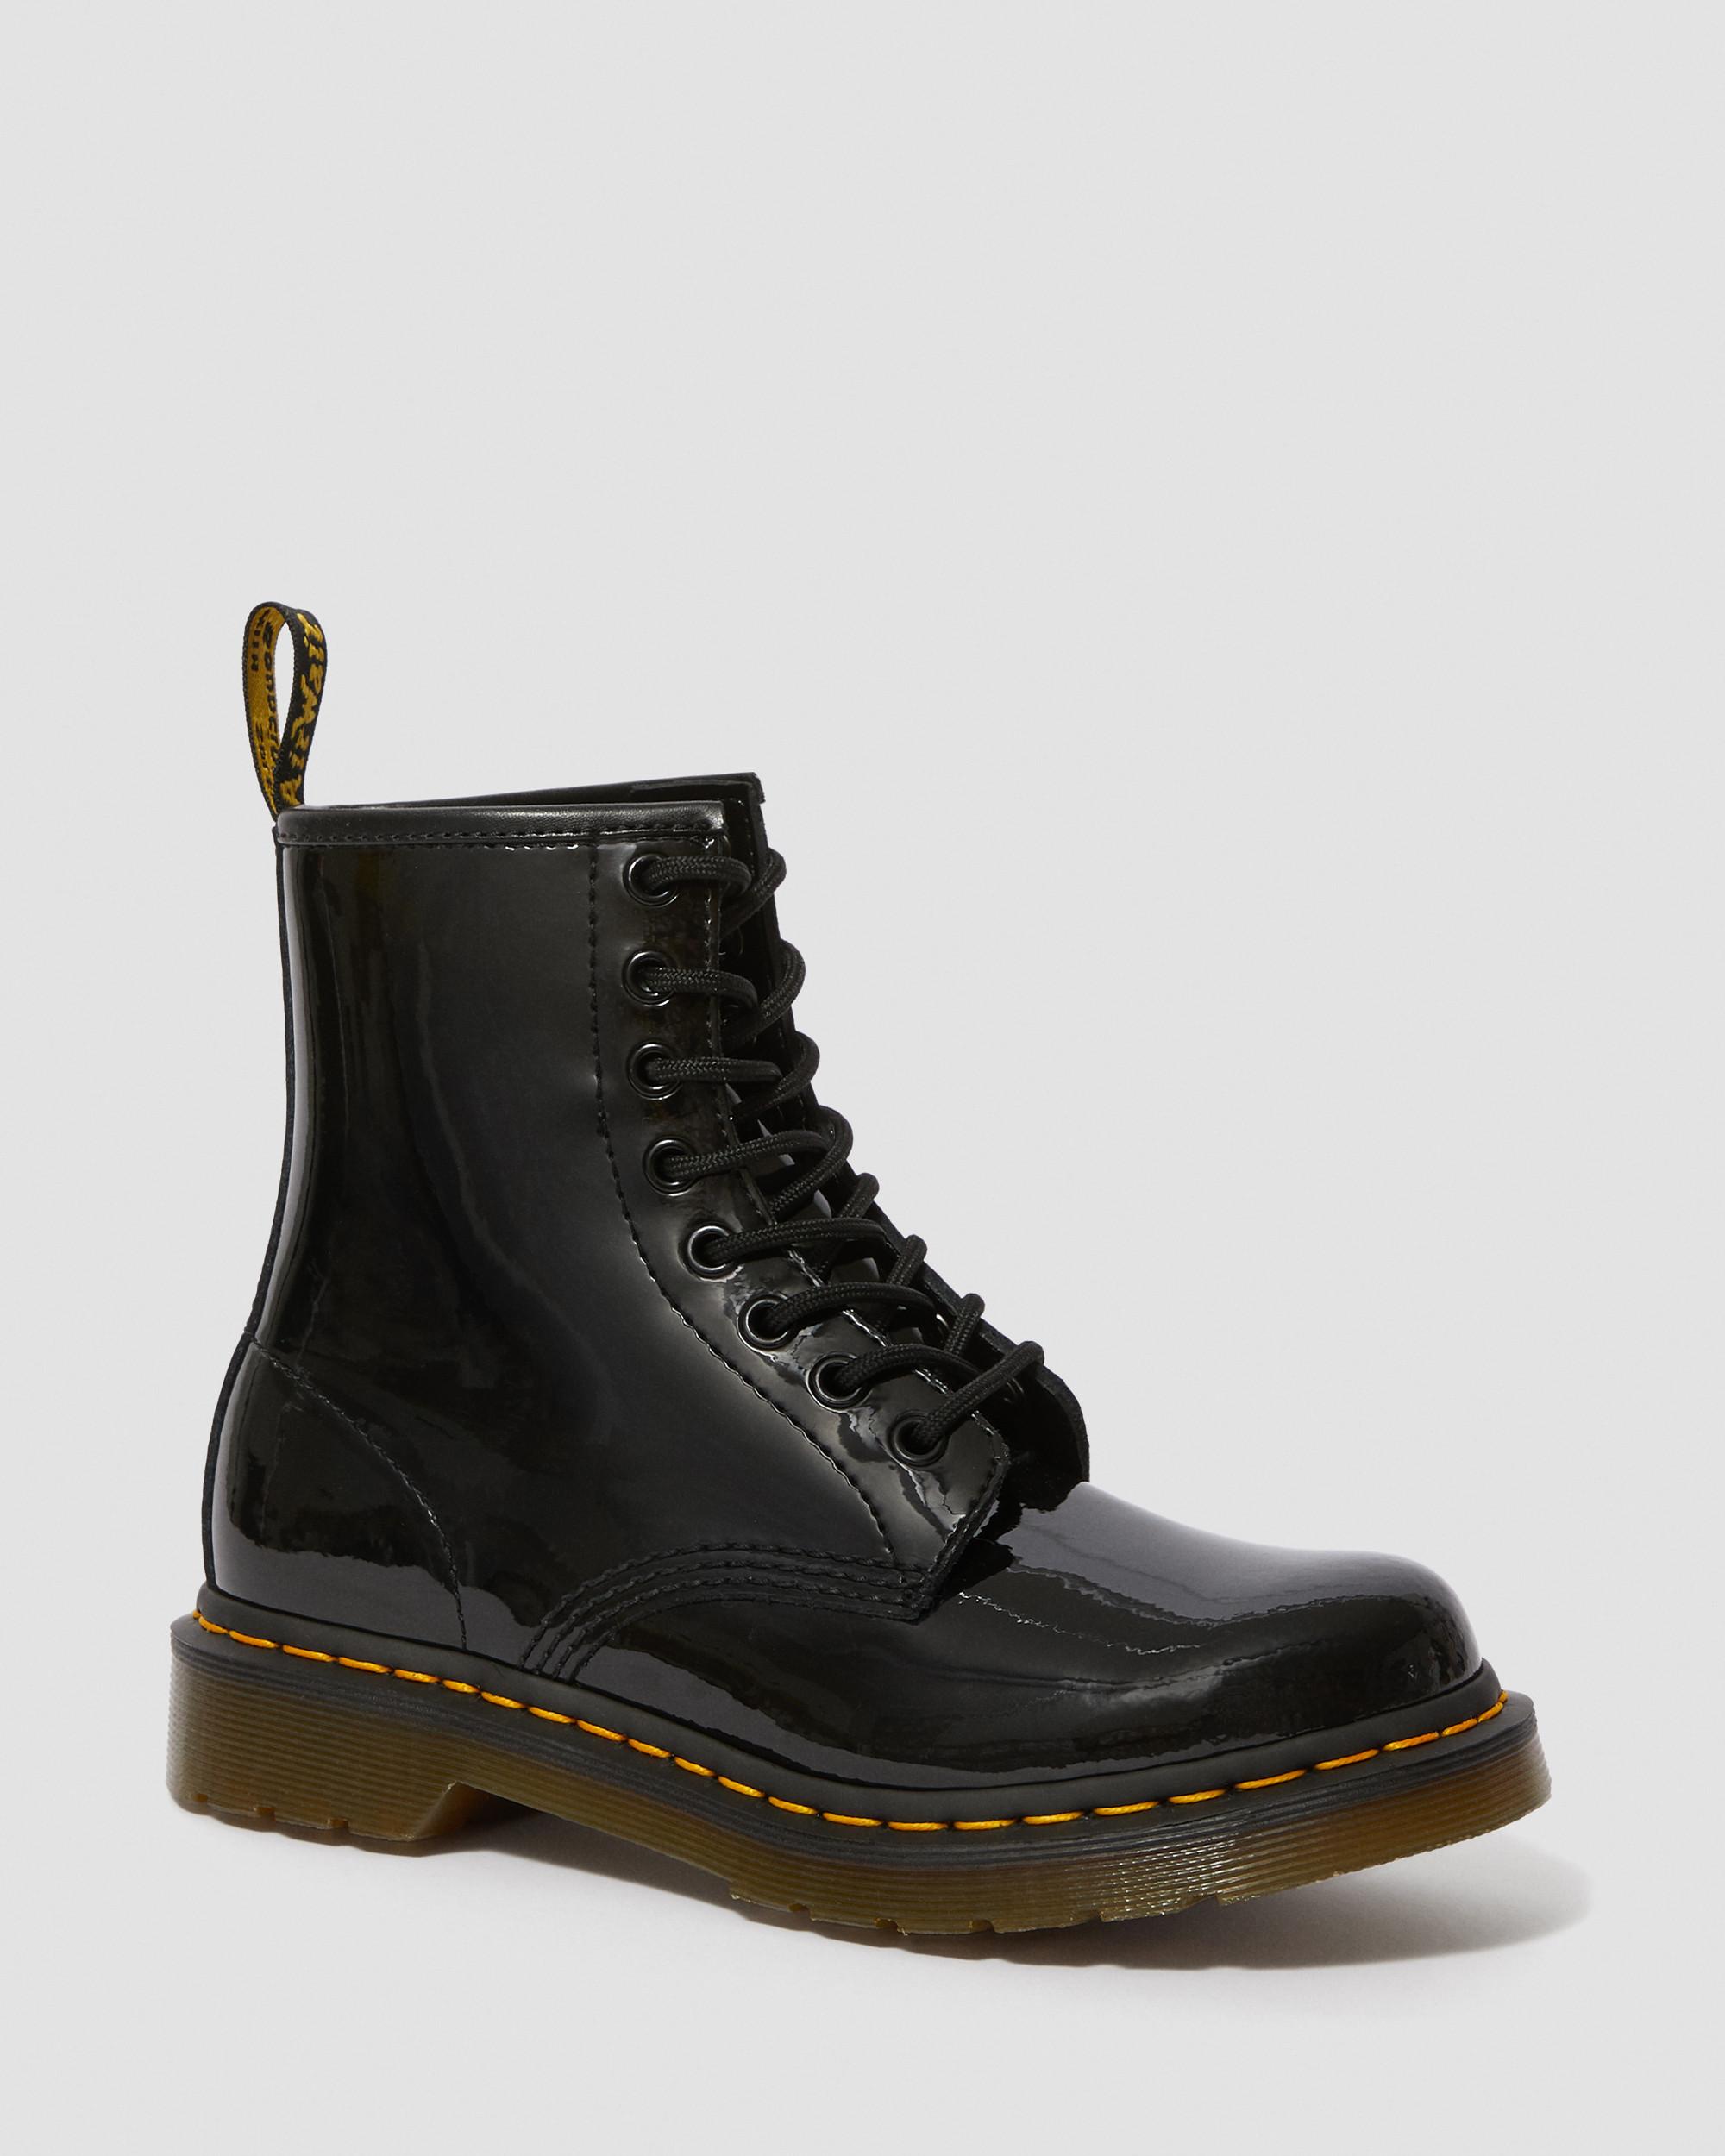 Patent Leather Up Boots | Martens